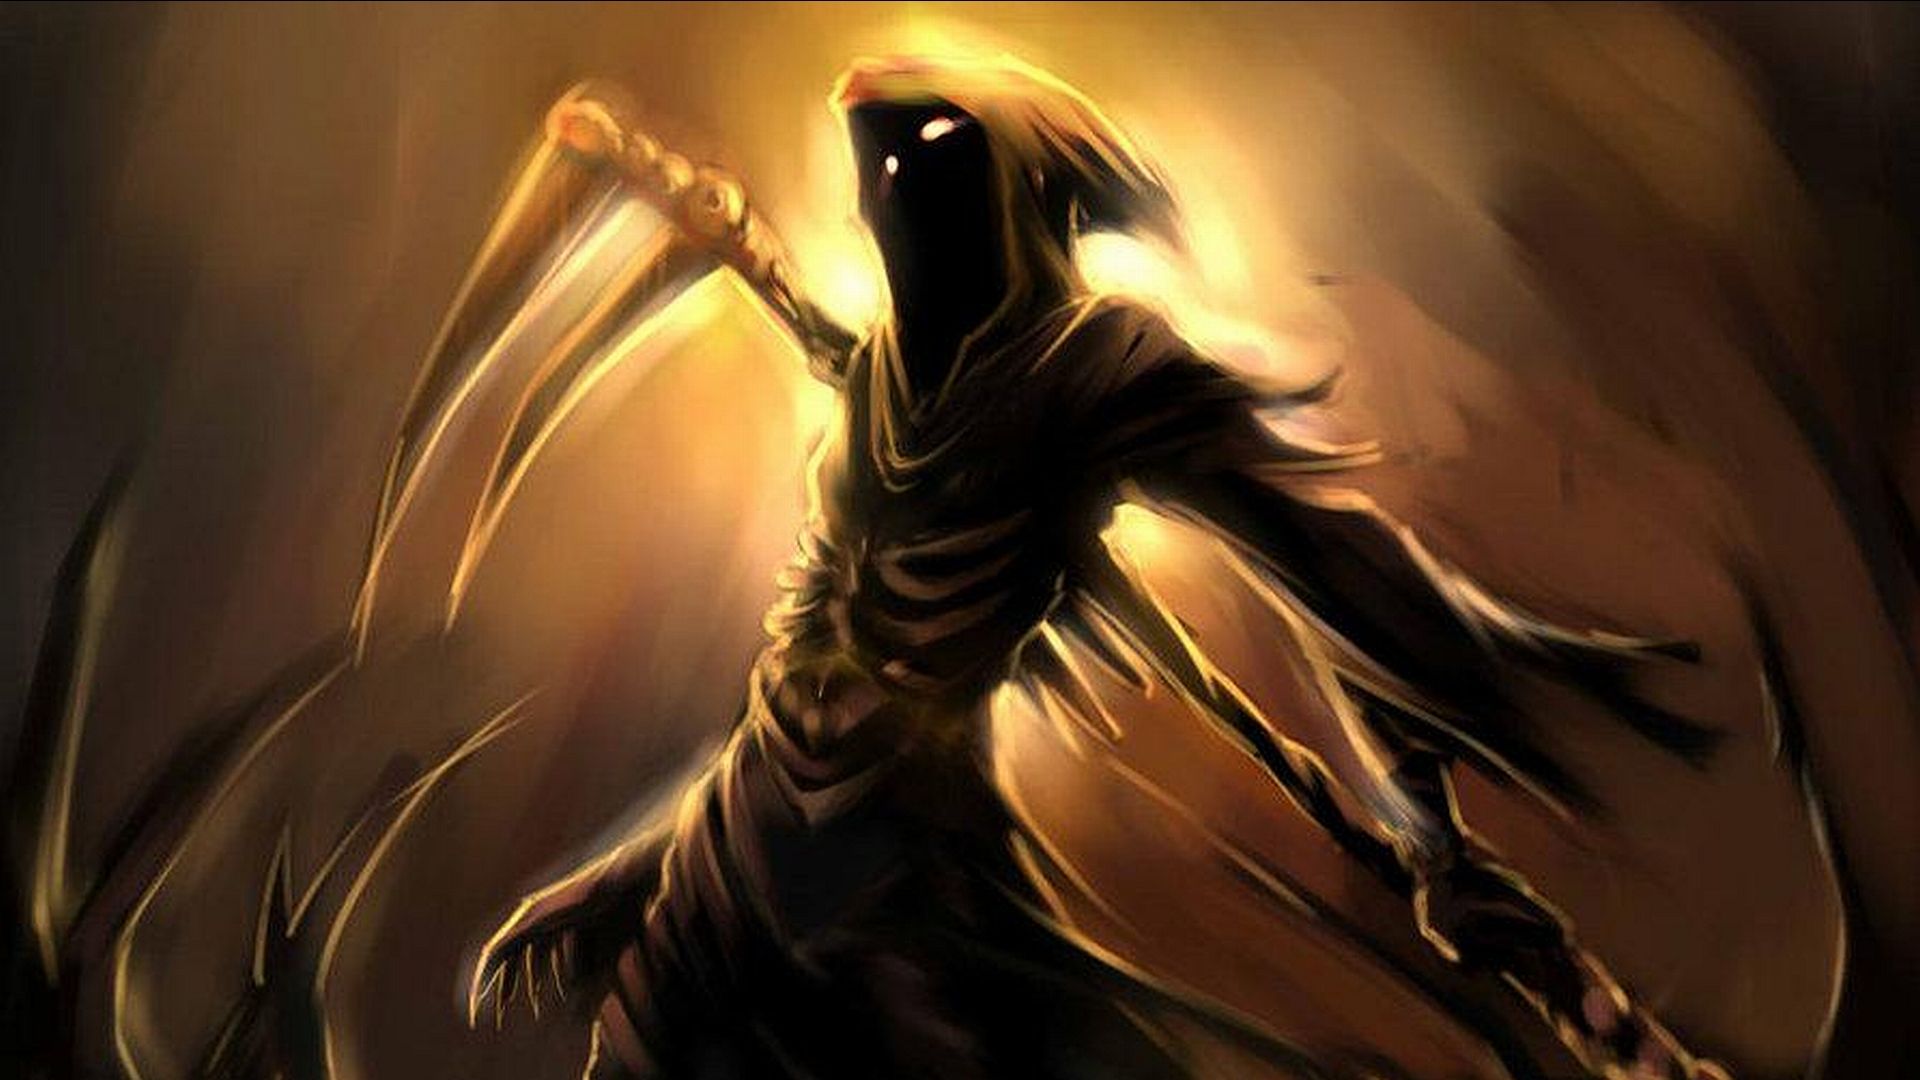 What are some good animes that feature the Grim Reaper? - Quora